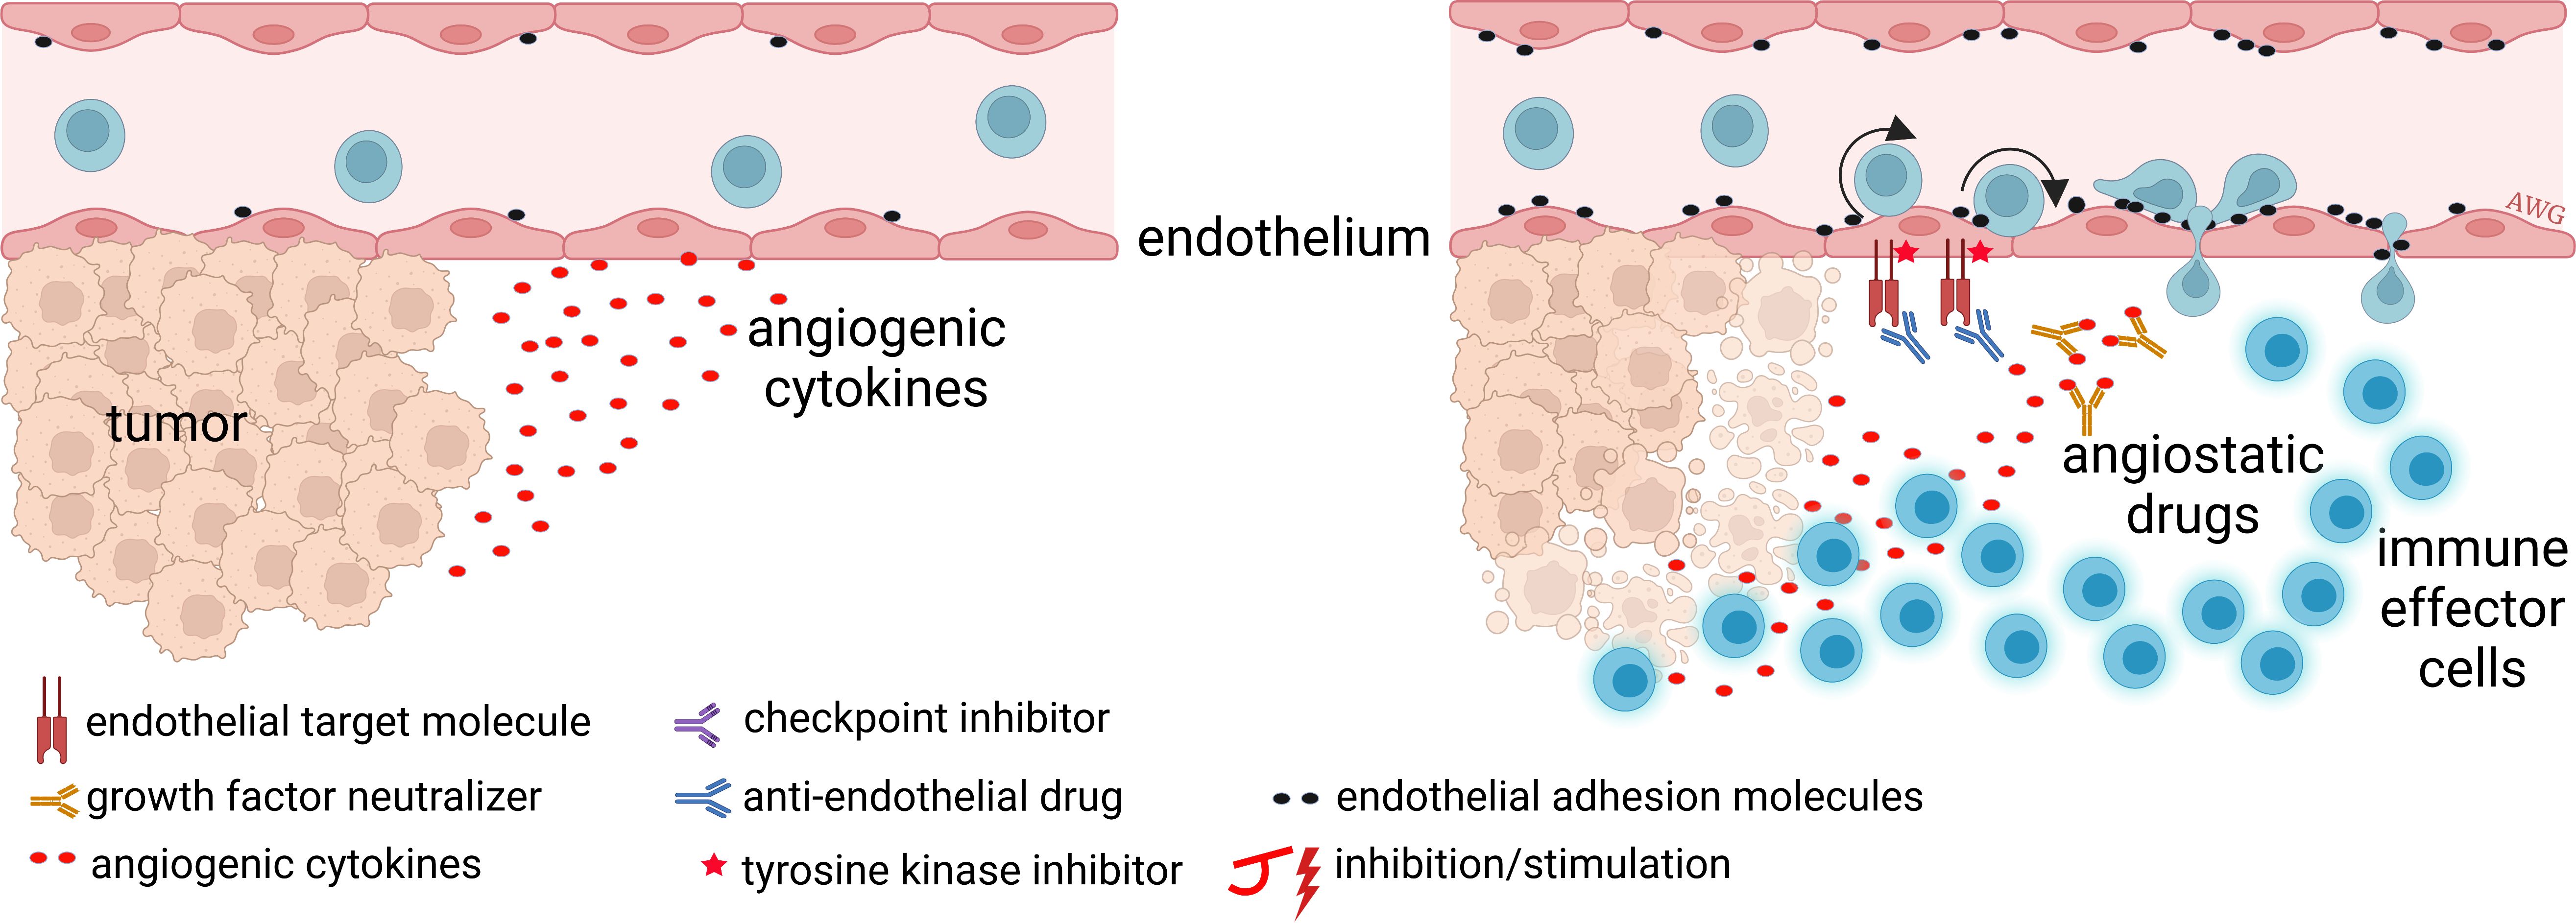 Left: Efficient tumor growth in immune-silent conditions induced by angiogenic cytokines. Right: Angiogenesis inhibitors allow invasion of immune effector cells.